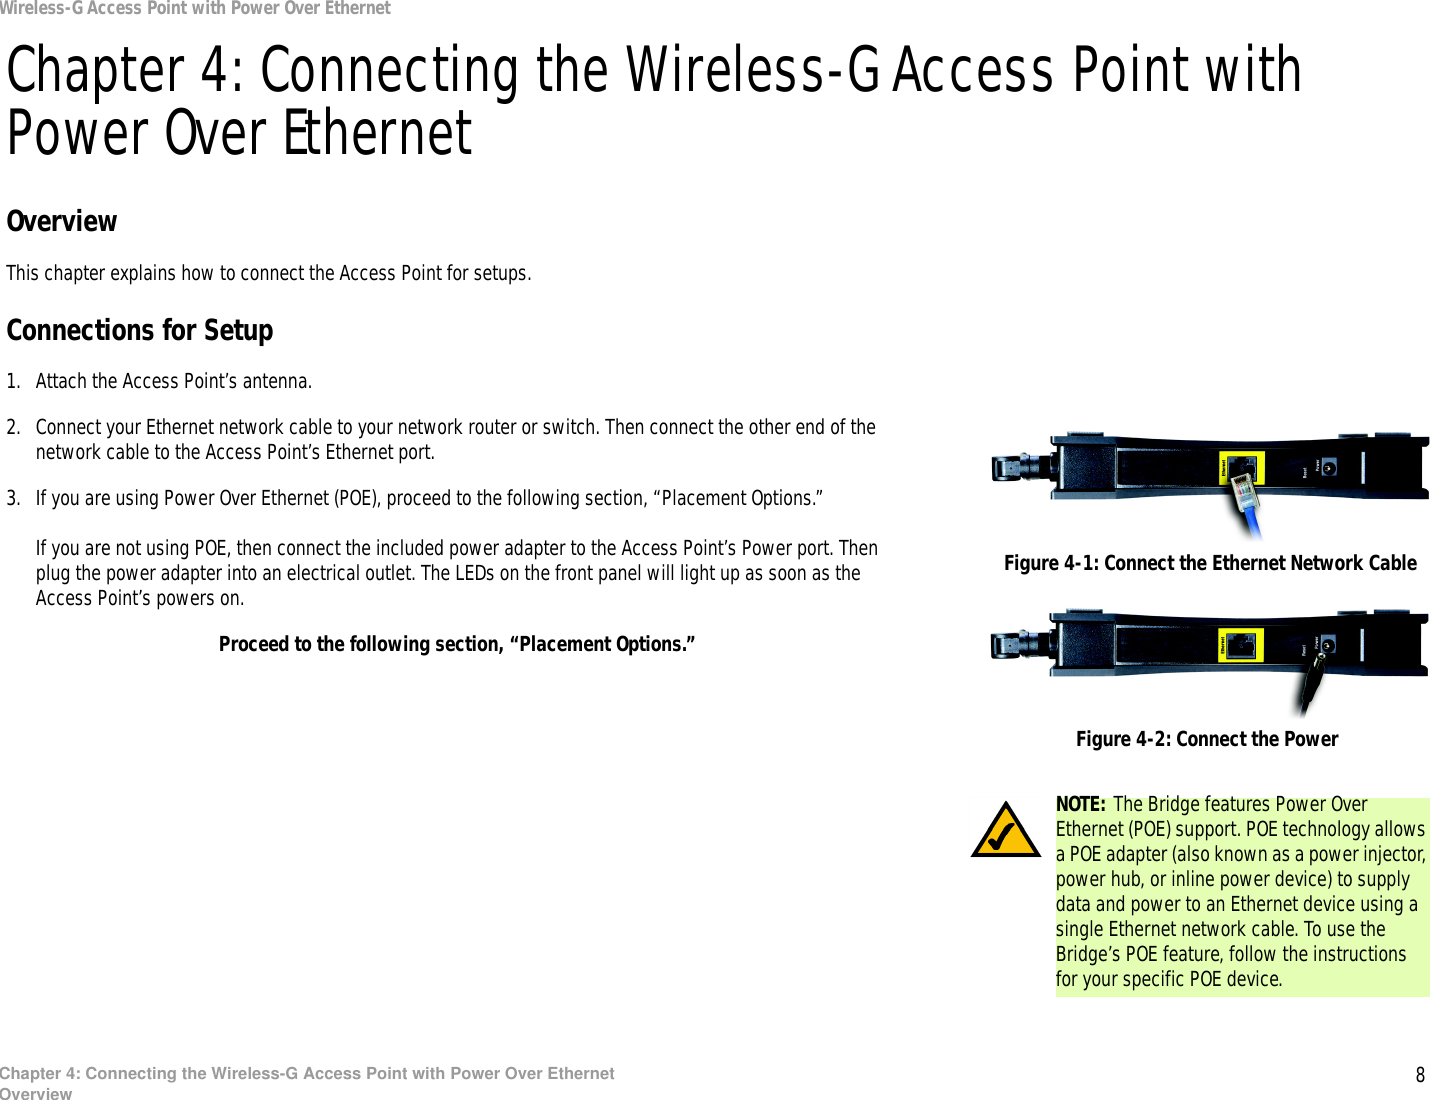 8Chapter 4: Connecting the Wireless-G Access Point with Power Over EthernetOverviewWireless-G Access Point with Power Over EthernetChapter 4: Connecting the Wireless-G Access Point with Power Over EthernetOverviewThis chapter explains how to connect the Access Point for setups.Connections for Setup1. Attach the Access Point’s antenna.2. Connect your Ethernet network cable to your network router or switch. Then connect the other end of the network cable to the Access Point’s Ethernet port.3. If you are using Power Over Ethernet (POE), proceed to the following section, “Placement Options.”If you are not using POE, then connect the included power adapter to the Access Point’s Power port. Then plug the power adapter into an electrical outlet. The LEDs on the front panel will light up as soon as the Access Point’s powers on.Proceed to the following section, “Placement Options.”Figure 4-1: Connect the Ethernet Network CableFigure 4-2: Connect the PowerNOTE: The Bridge features Power Over Ethernet (POE) support. POE technology allows a POE adapter (also known as a power injector, power hub, or inline power device) to supply data and power to an Ethernet device using a single Ethernet network cable. To use the Bridge’s POE feature, follow the instructions for your specific POE device.